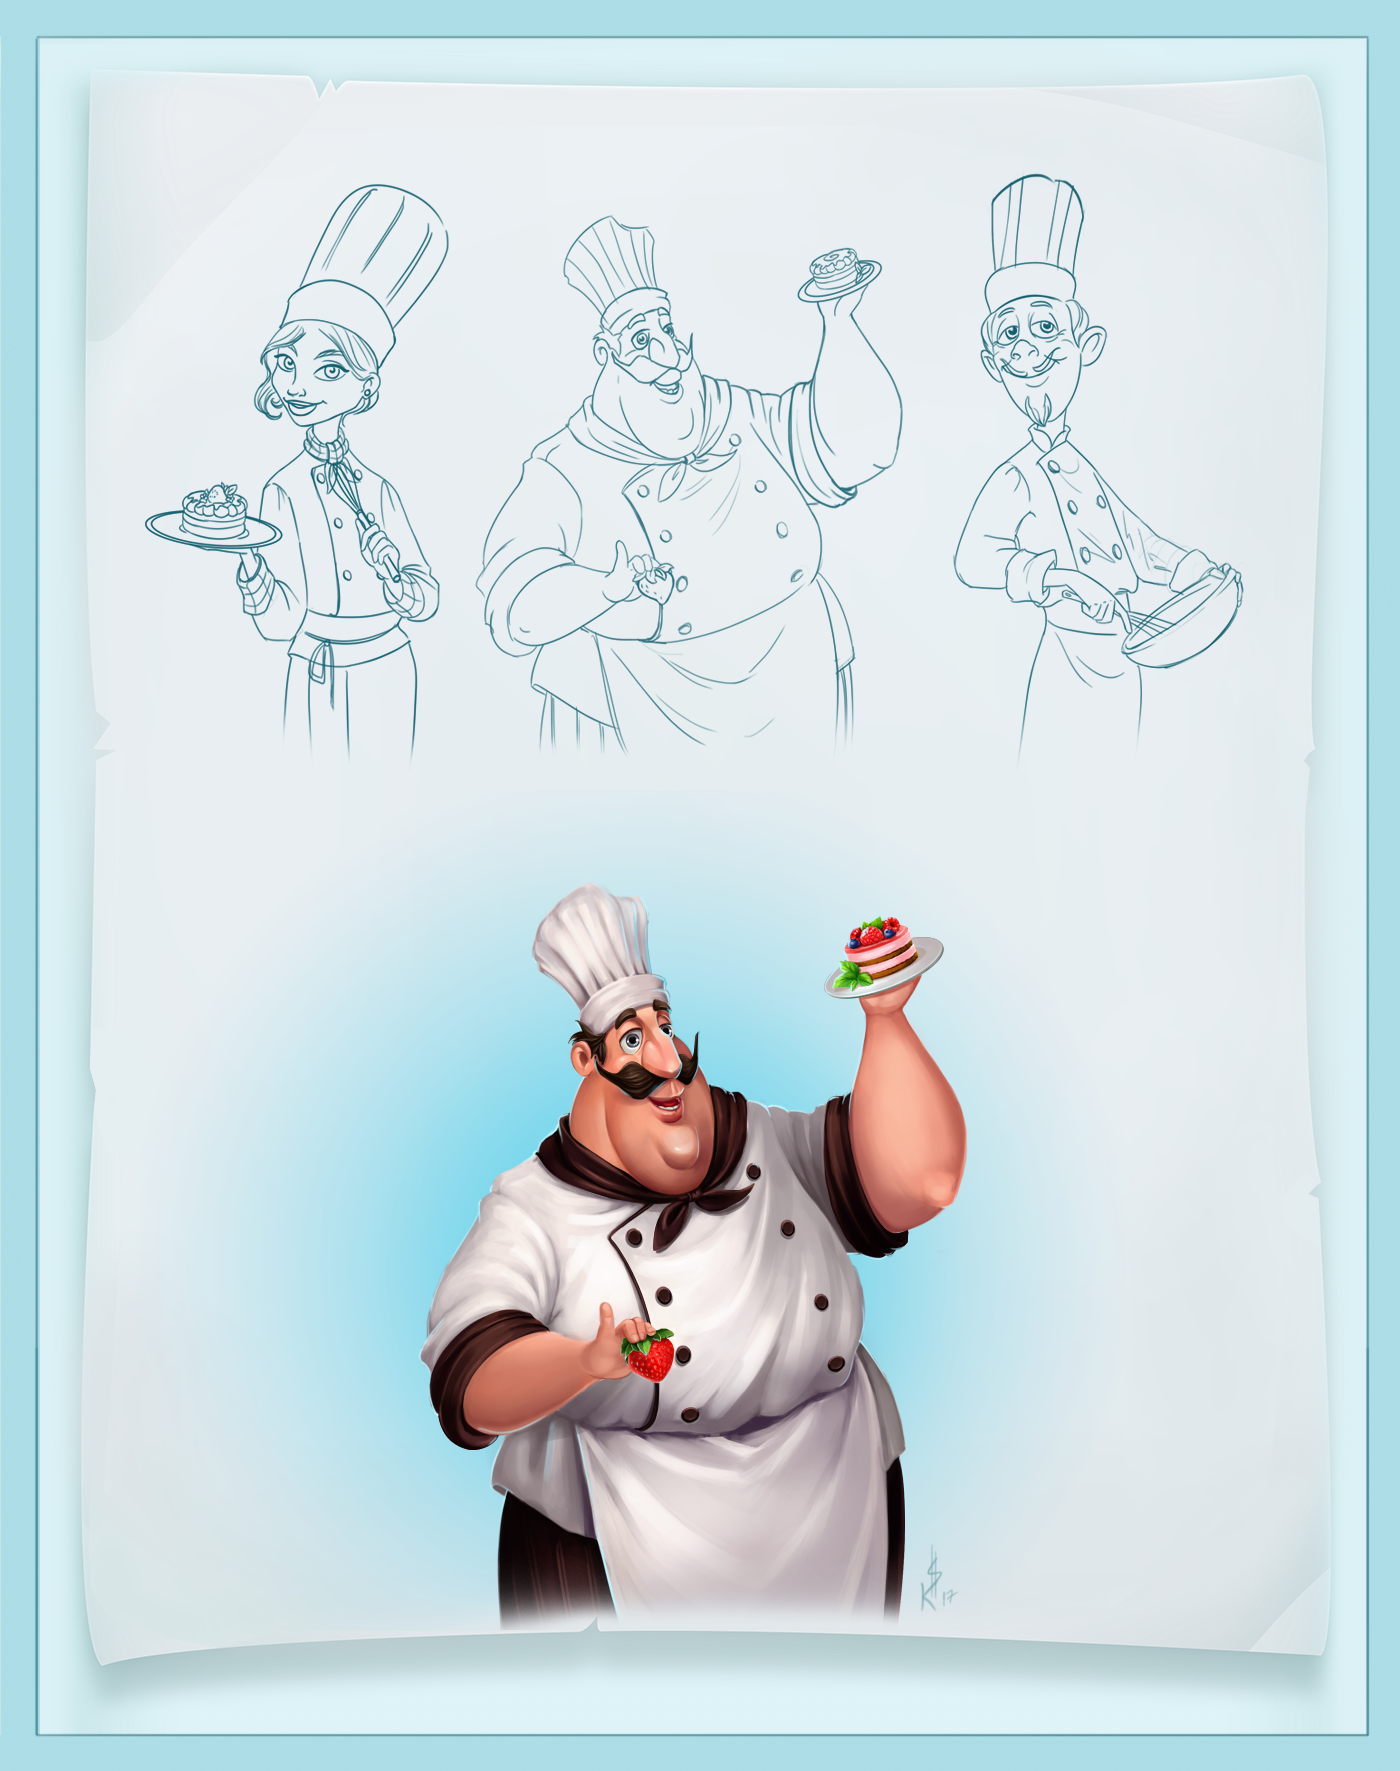 Pastry cook cooker photoshop charachter Game Art concept art ILLUSTRATION 